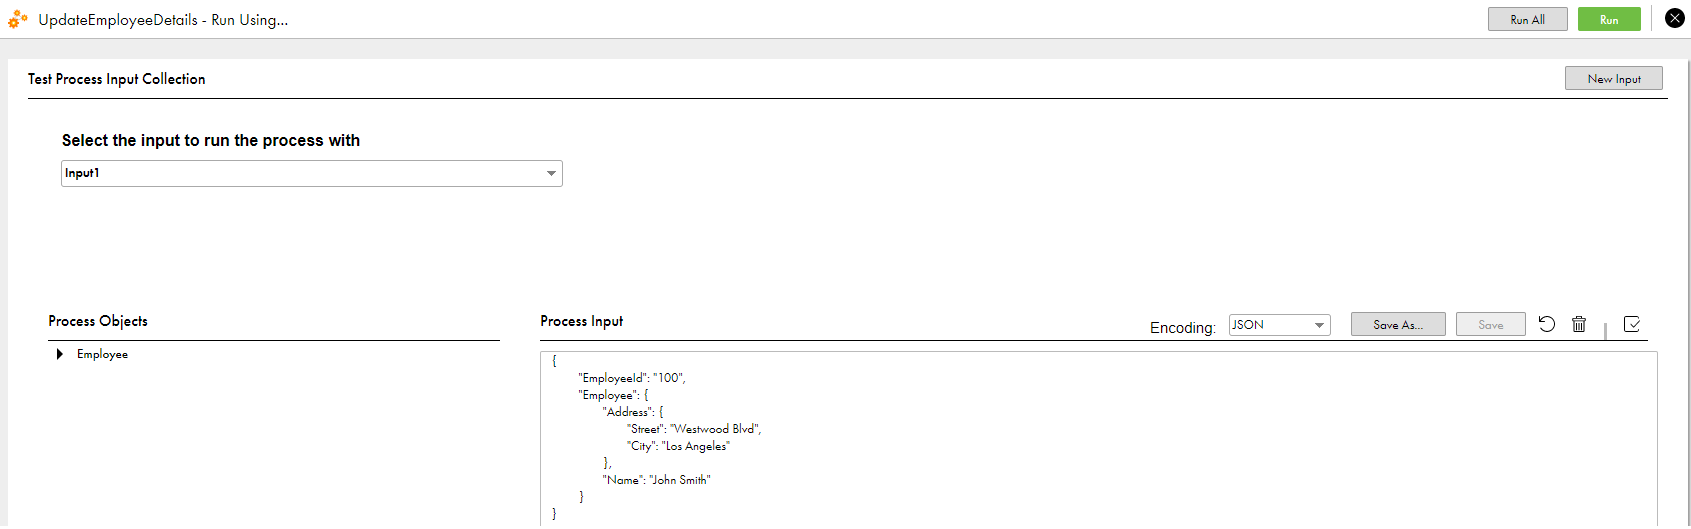 The image shows the Test Process Input Collection page. 
				  